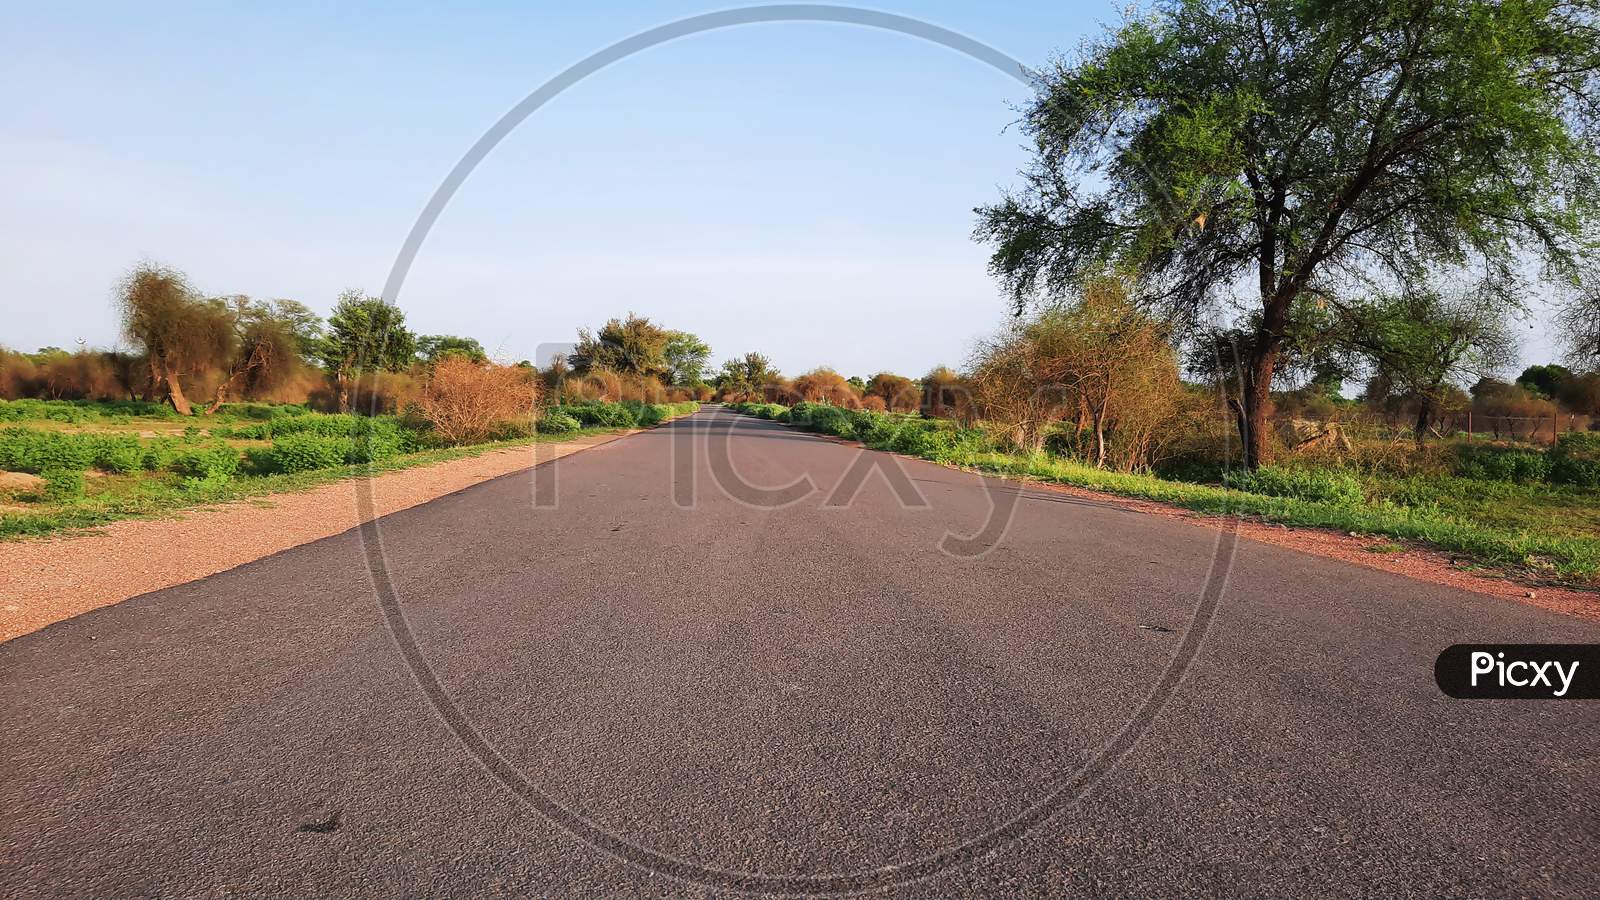 Asphalt Road In Rural Area Of India With Grunge On Edges Closeup